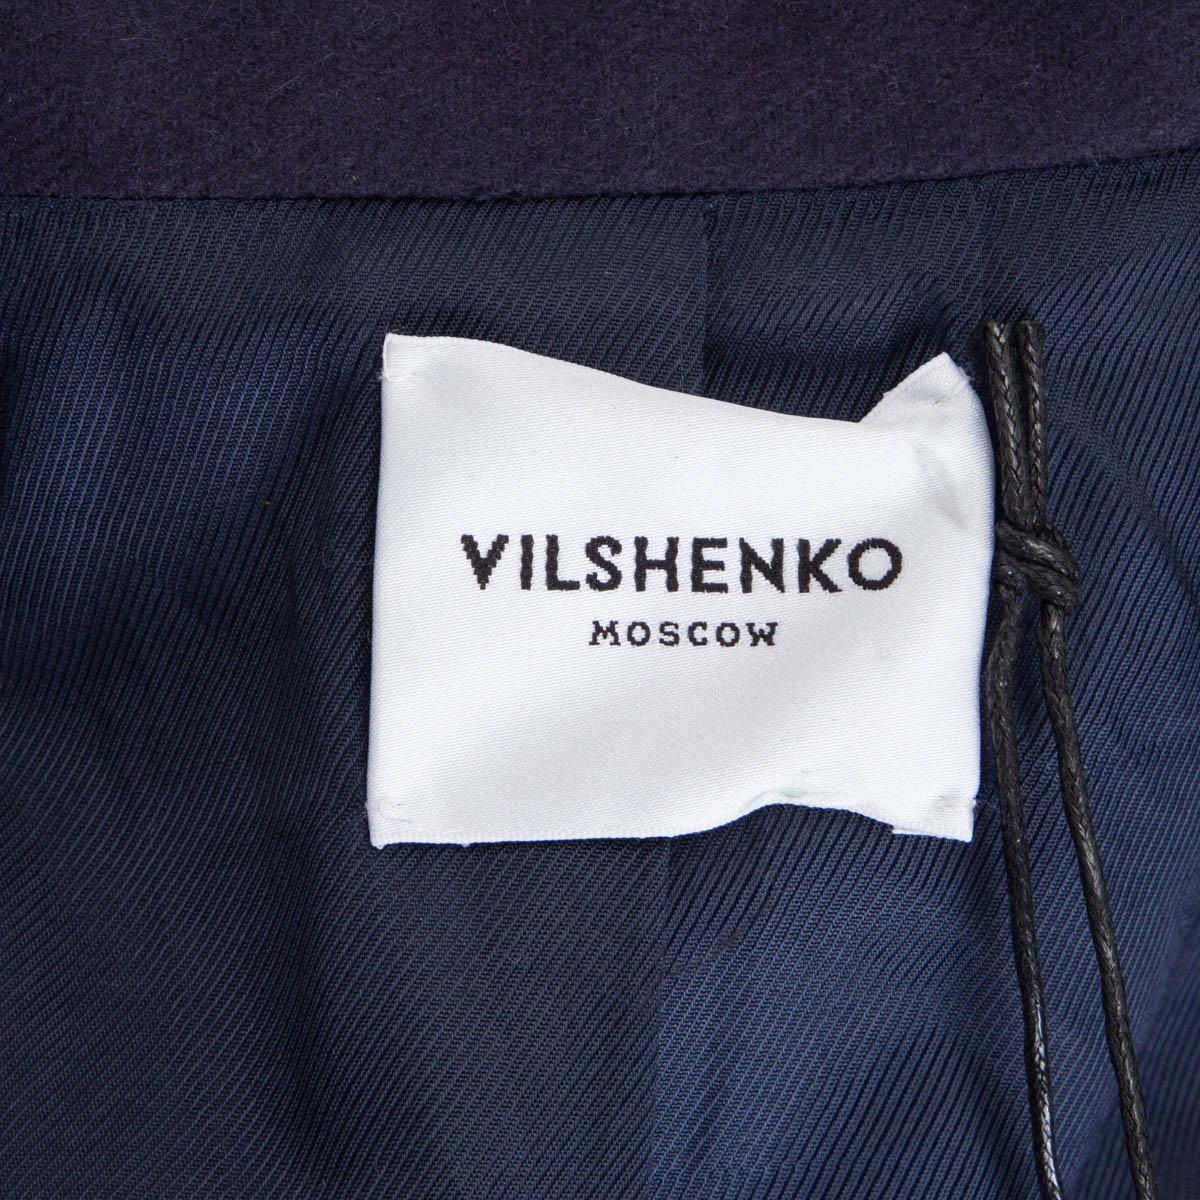 VILSHENKO midnight blue wool FLORAL EMBROIDERED Coat Jacket 10 M In Excellent Condition For Sale In Zürich, CH